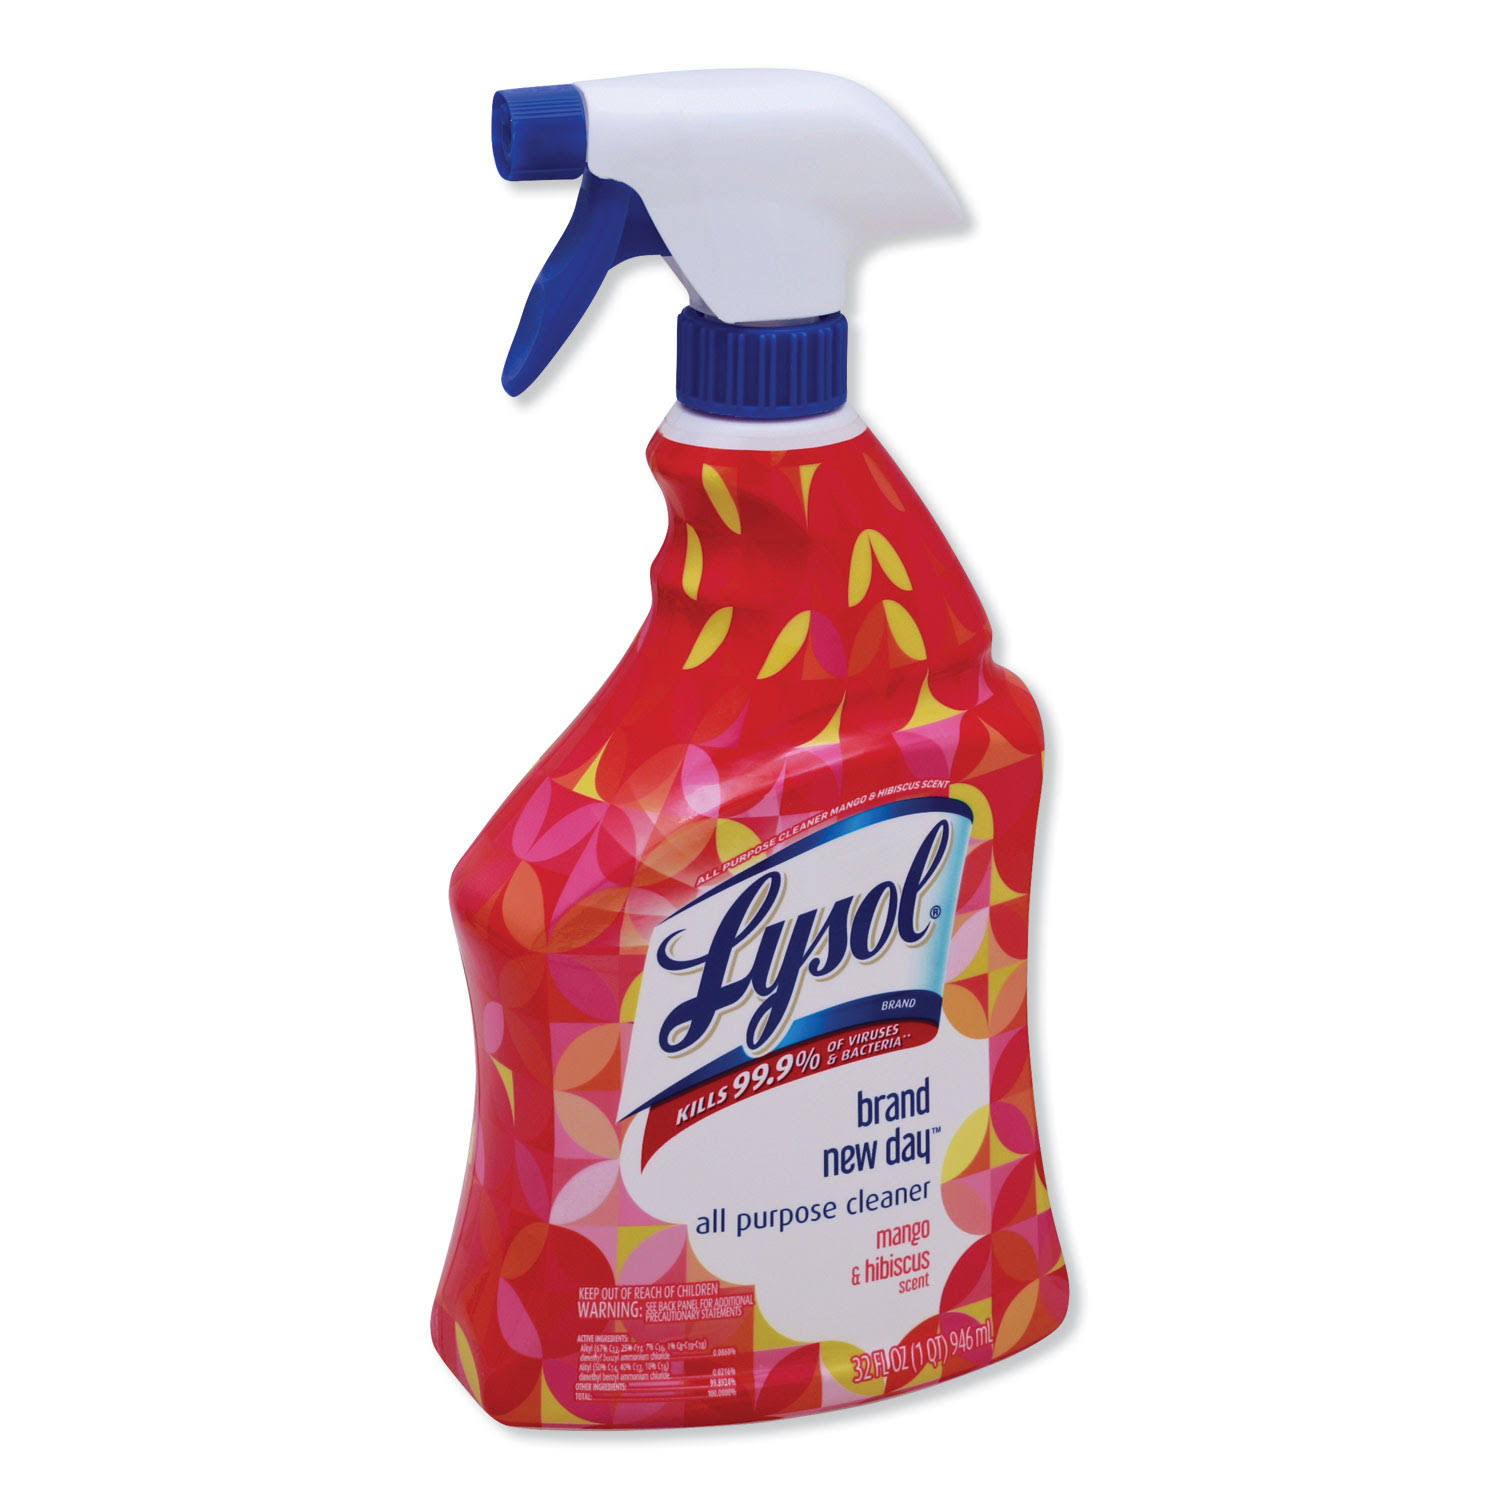 Lysol Brand New Day Household All Purpose Cleaner - 32oz